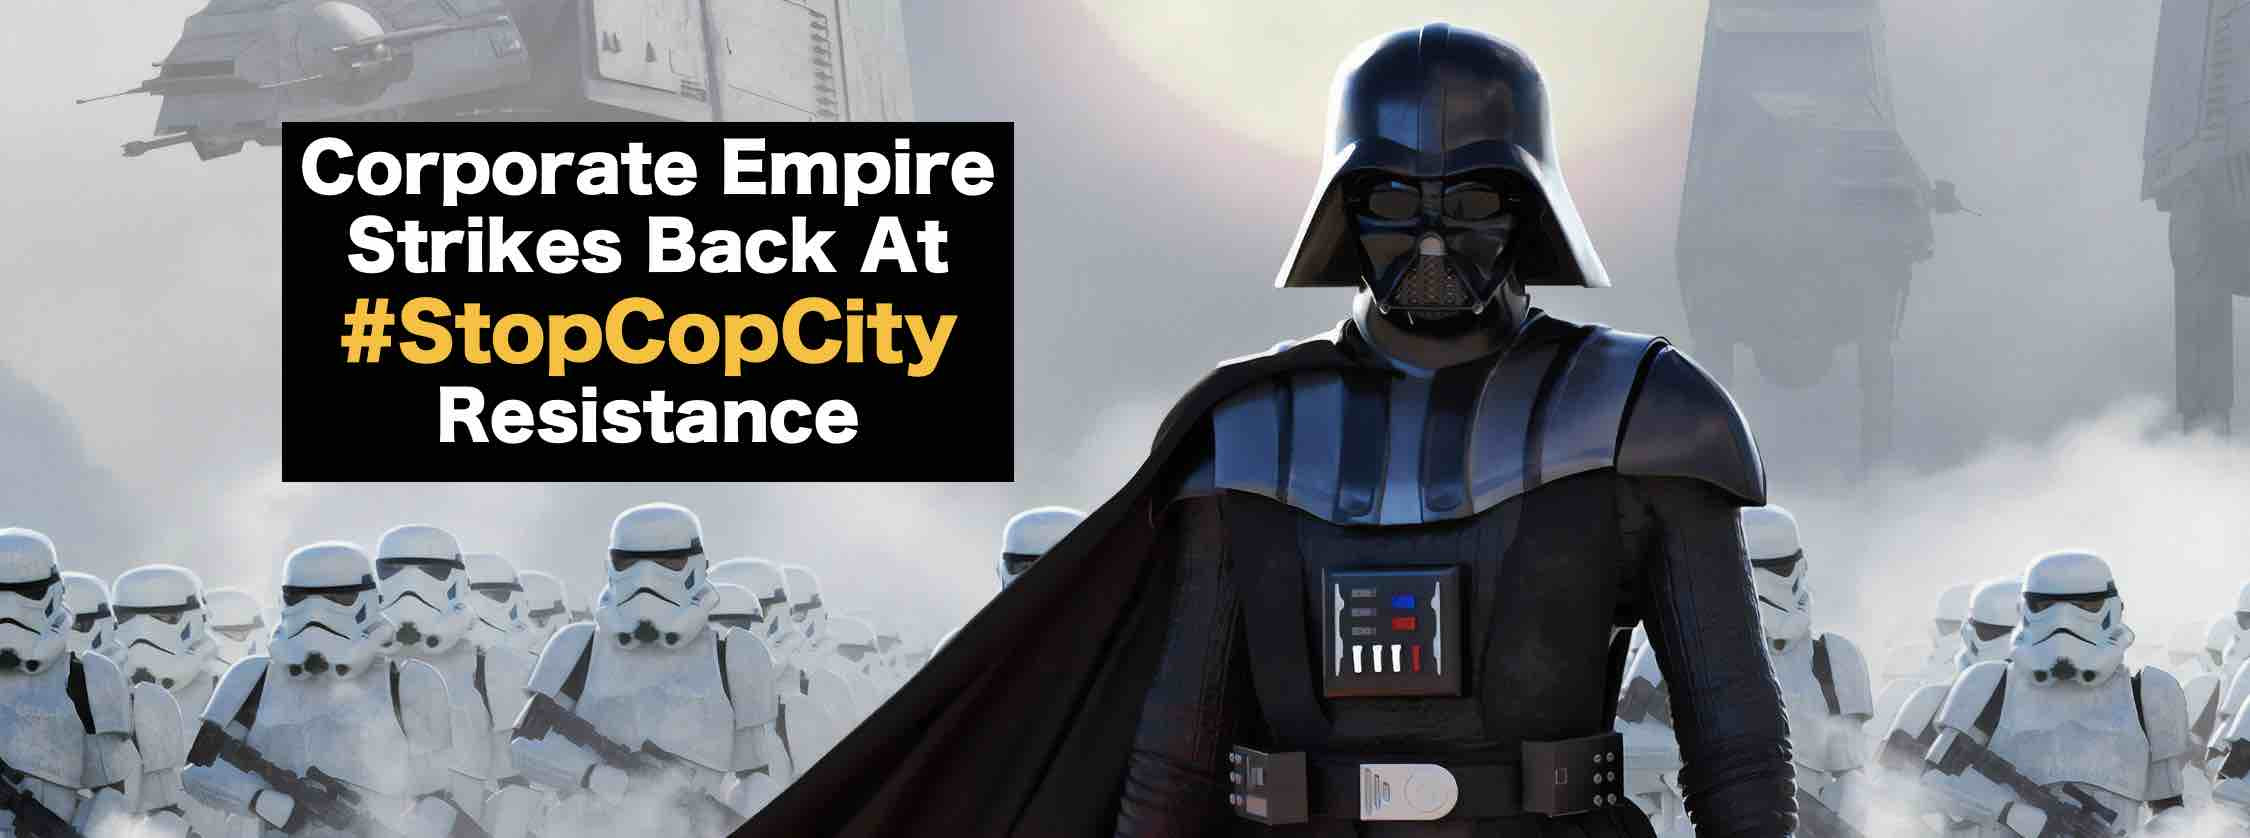 Corporate Empire Strikes Back At #StopCopCity Resistance